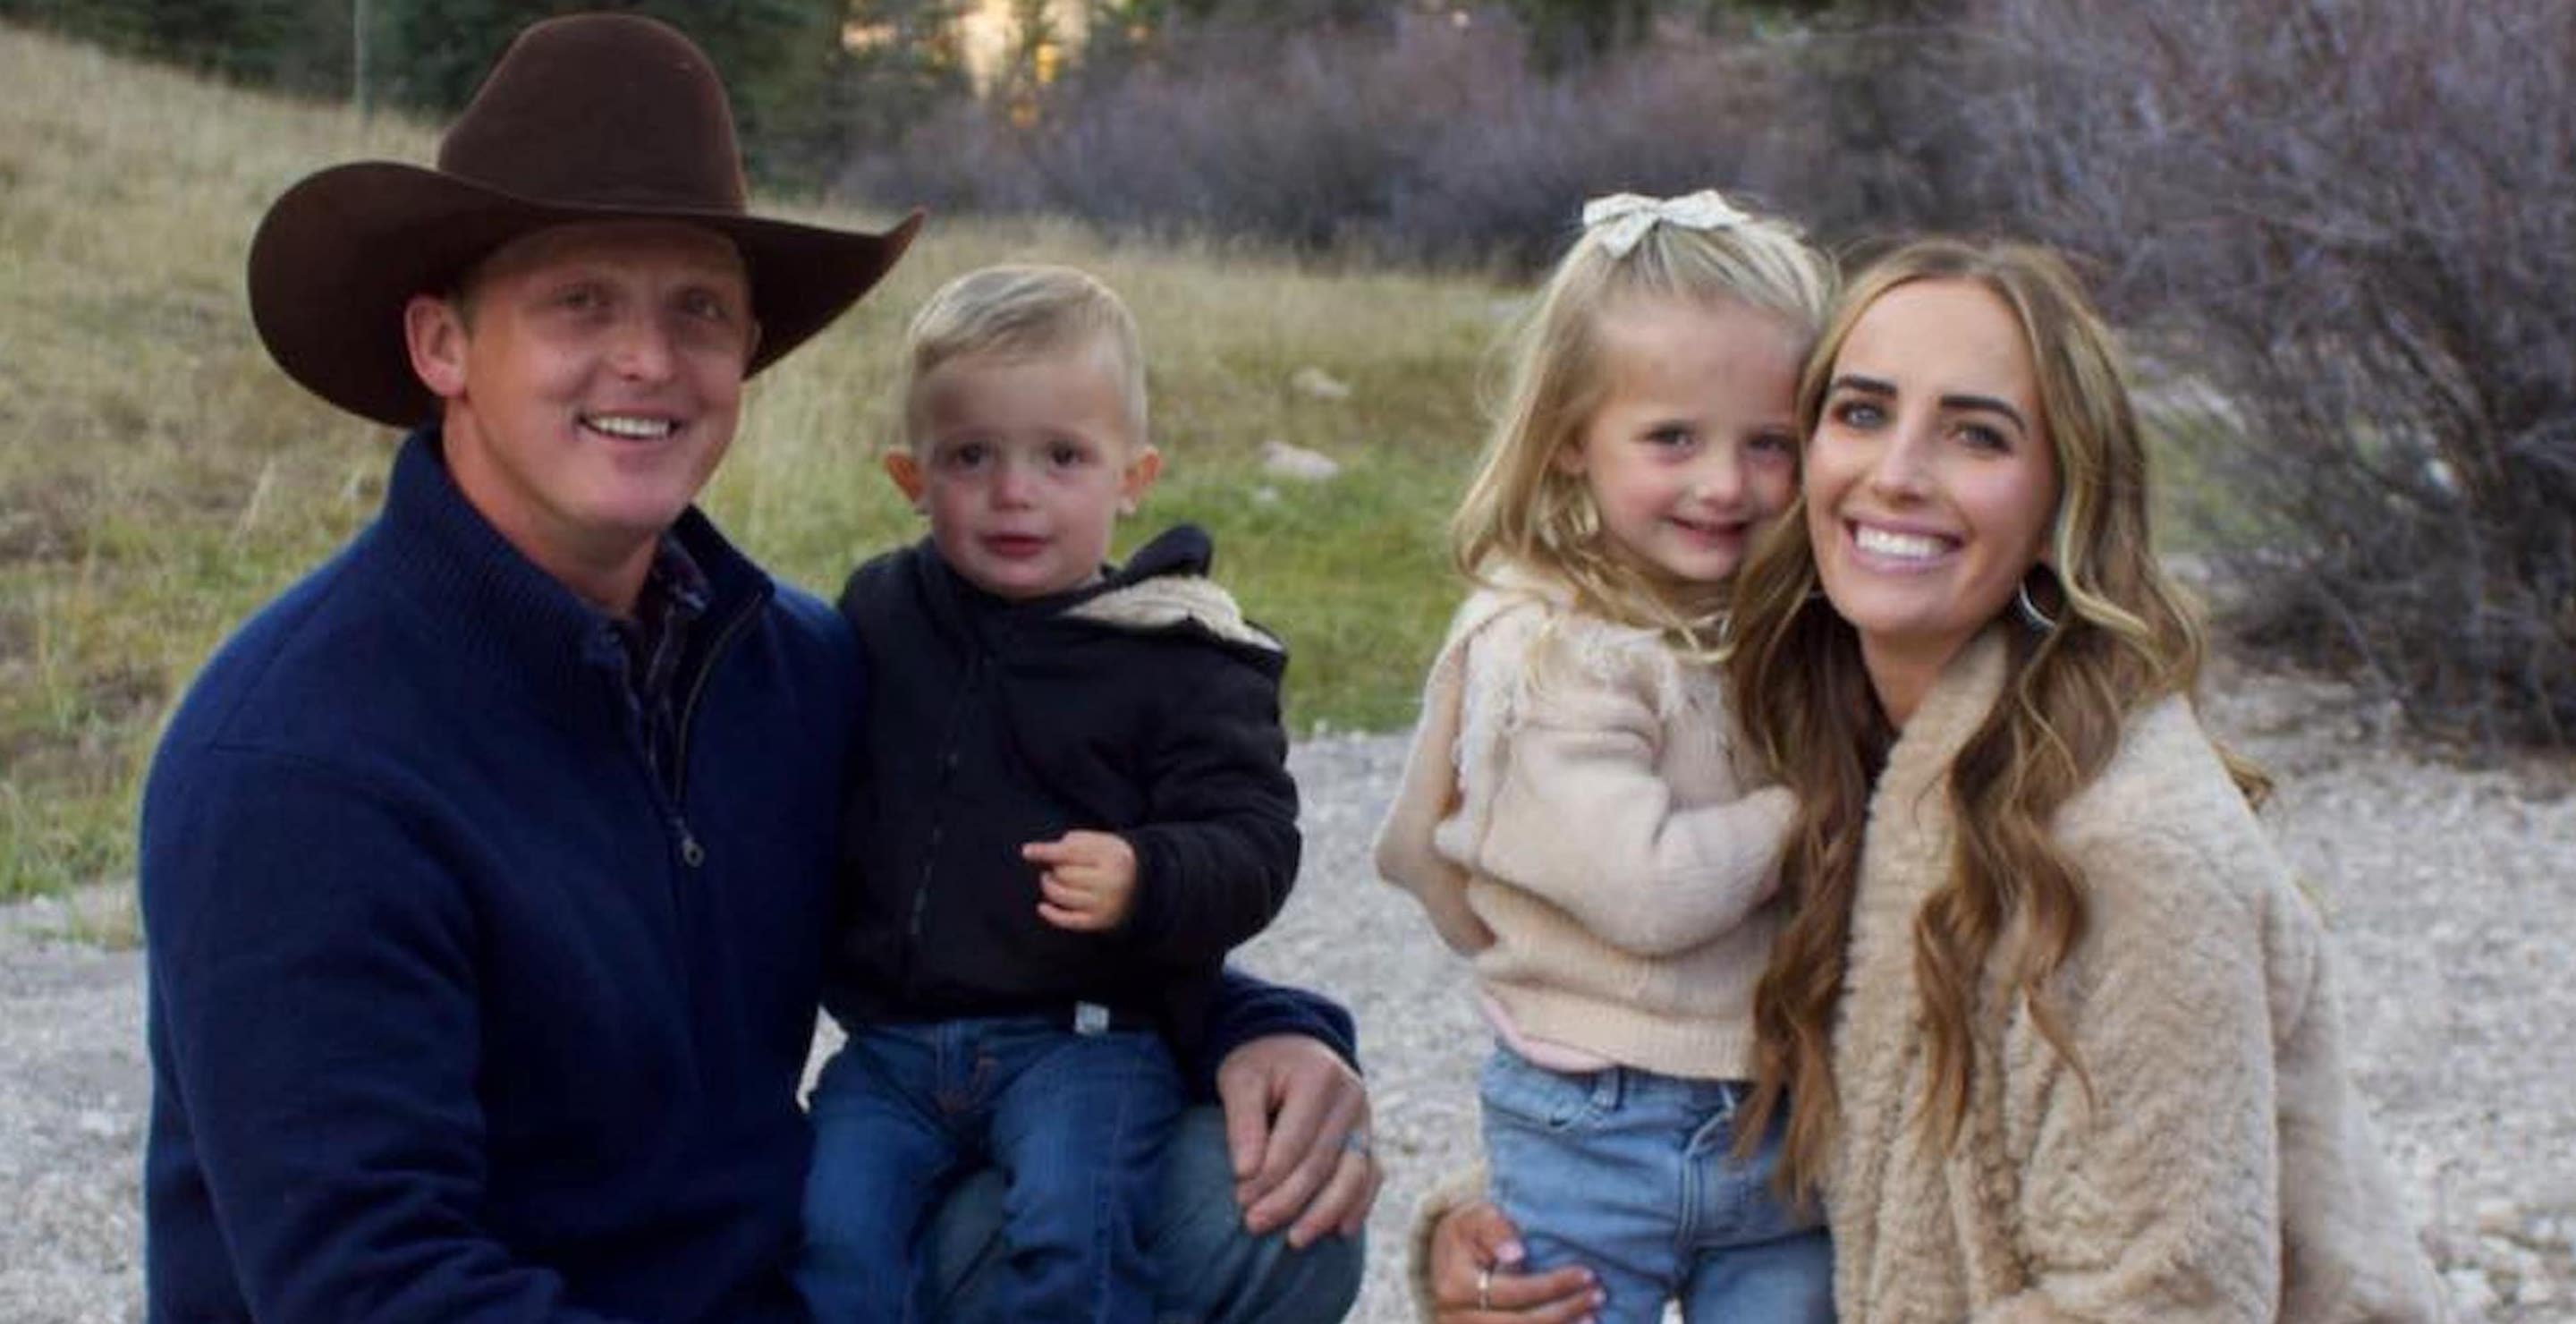 wife-of-rodeo-star-spencer-wright-gives-health-update-on-son